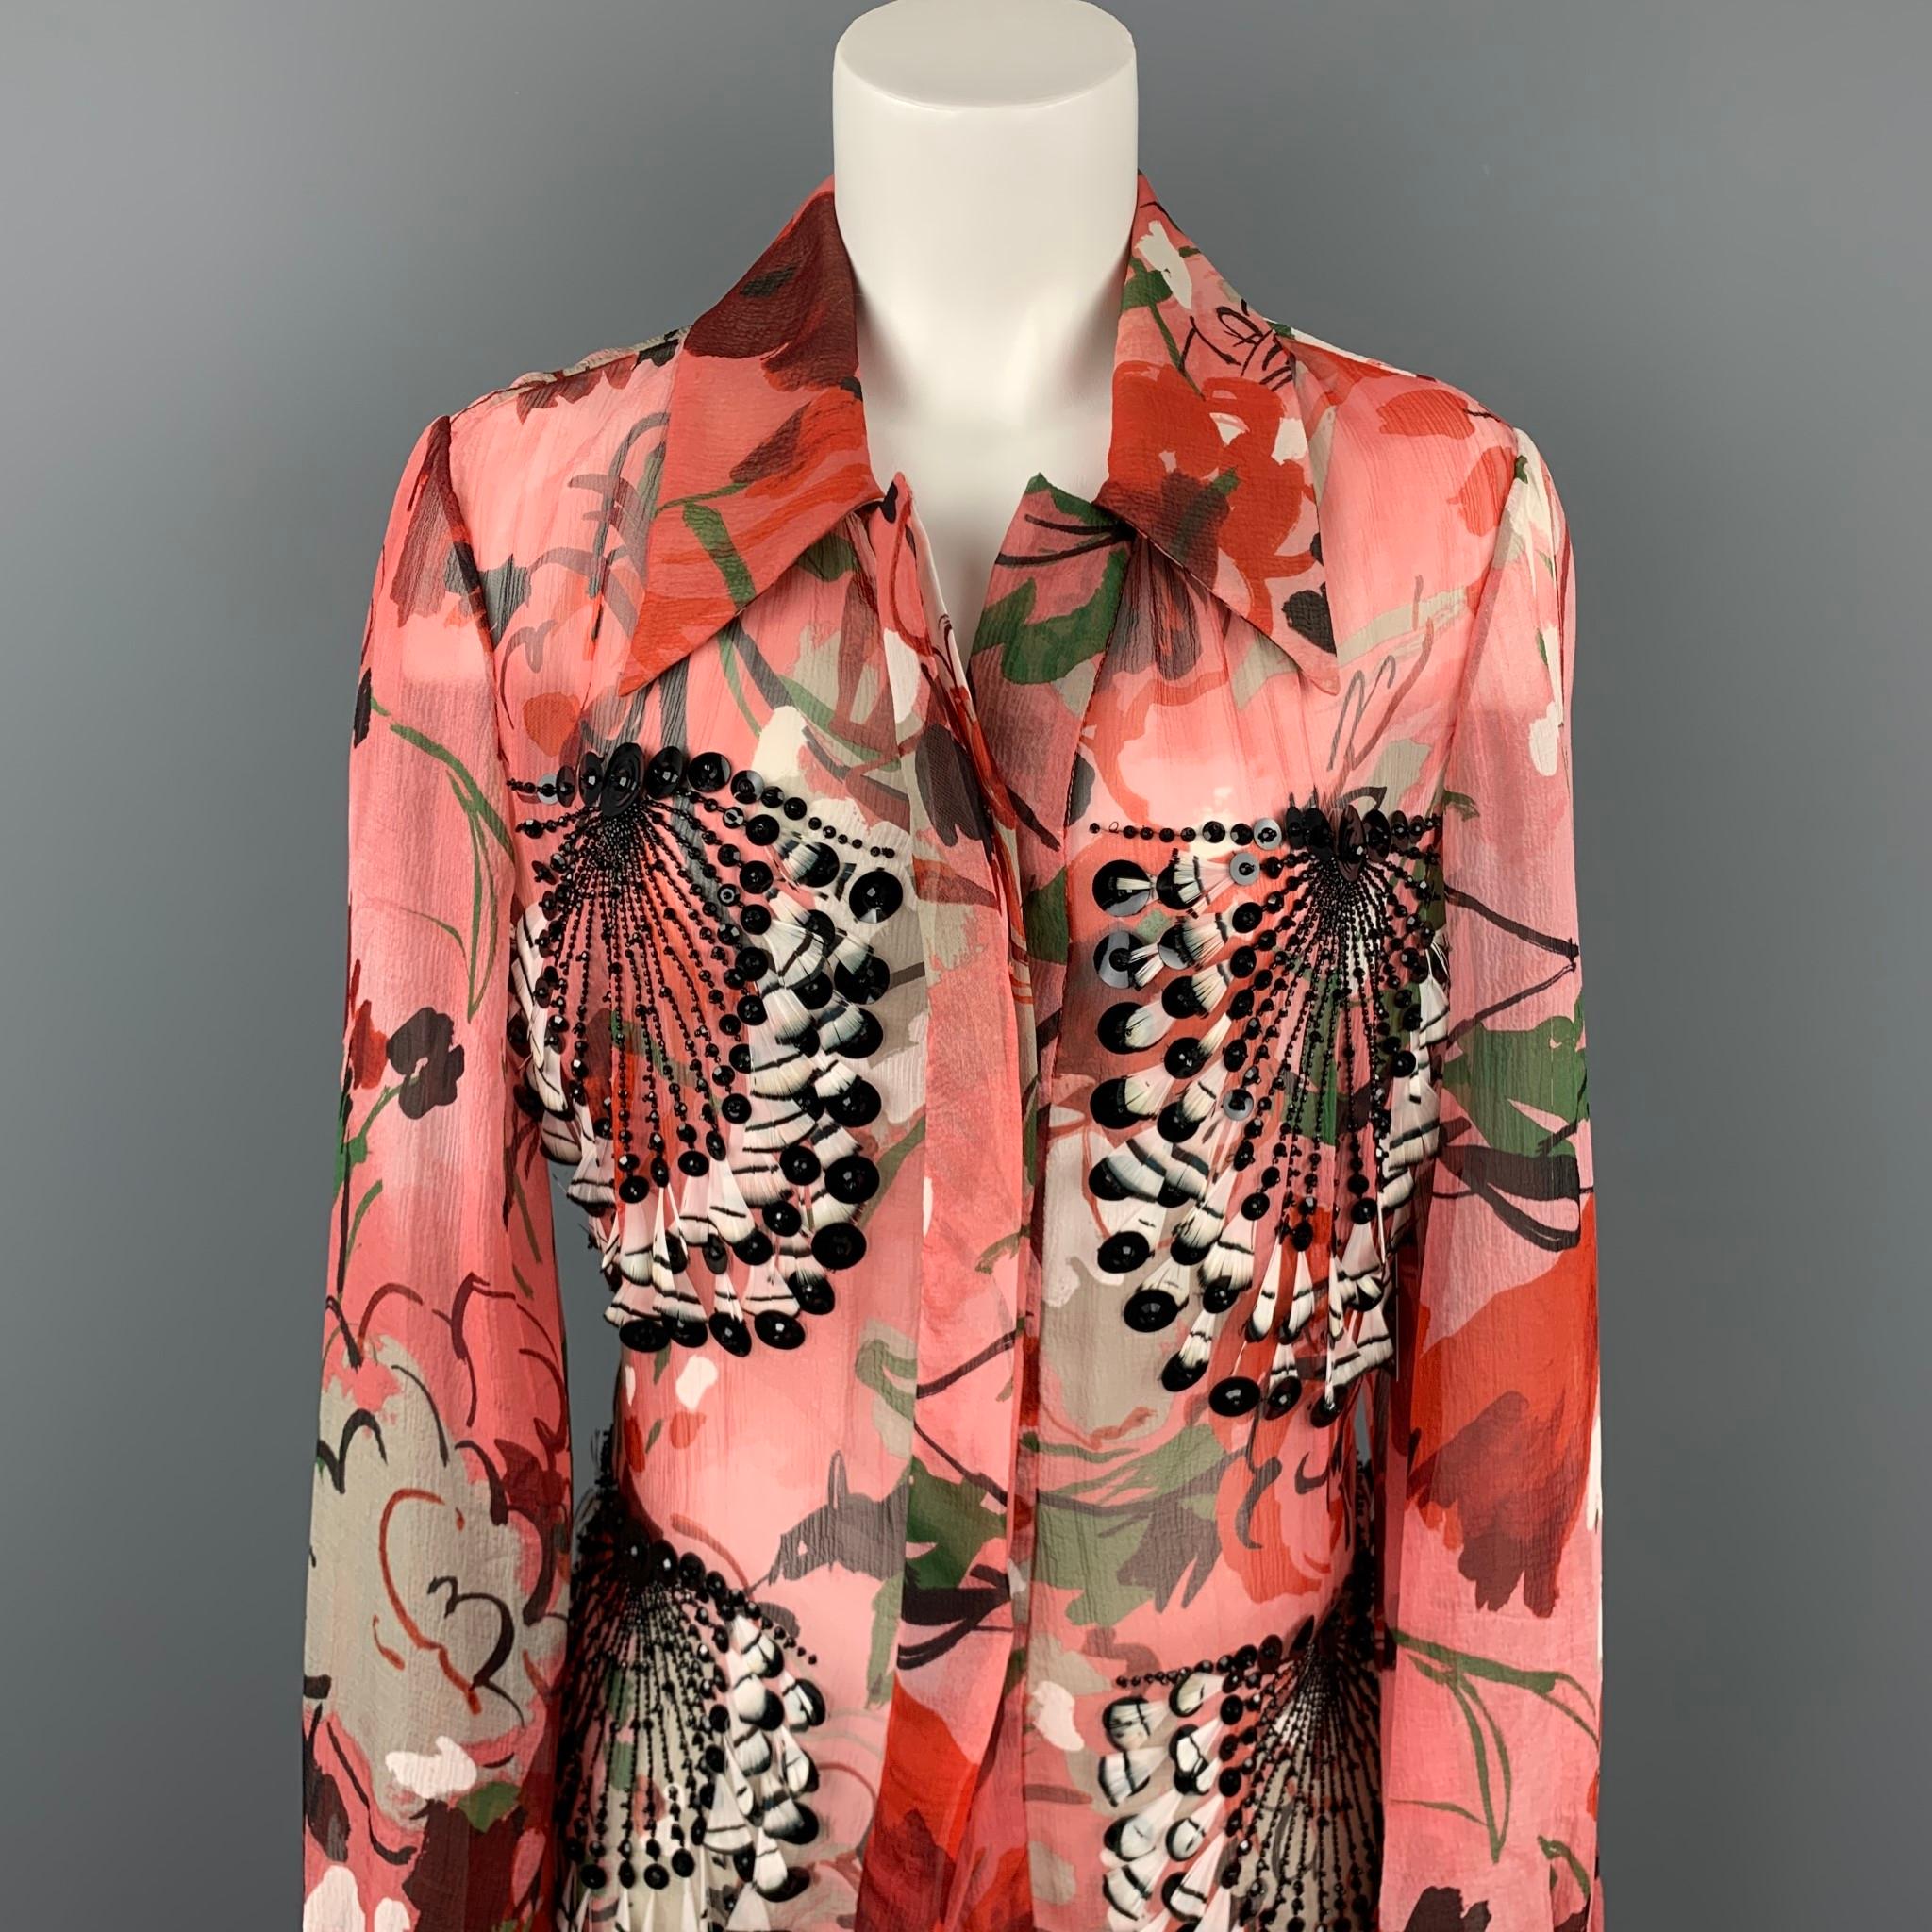 CAROLINA HERRERA jacket comes in a pink print silk with beaded and feather details featuring a back tie up detail, mesh lined, pointed collar, and a hidden button closure. Missing buttons. As-Is. Made in USA.

Very Good Pre-Owned Condition.
Marked: